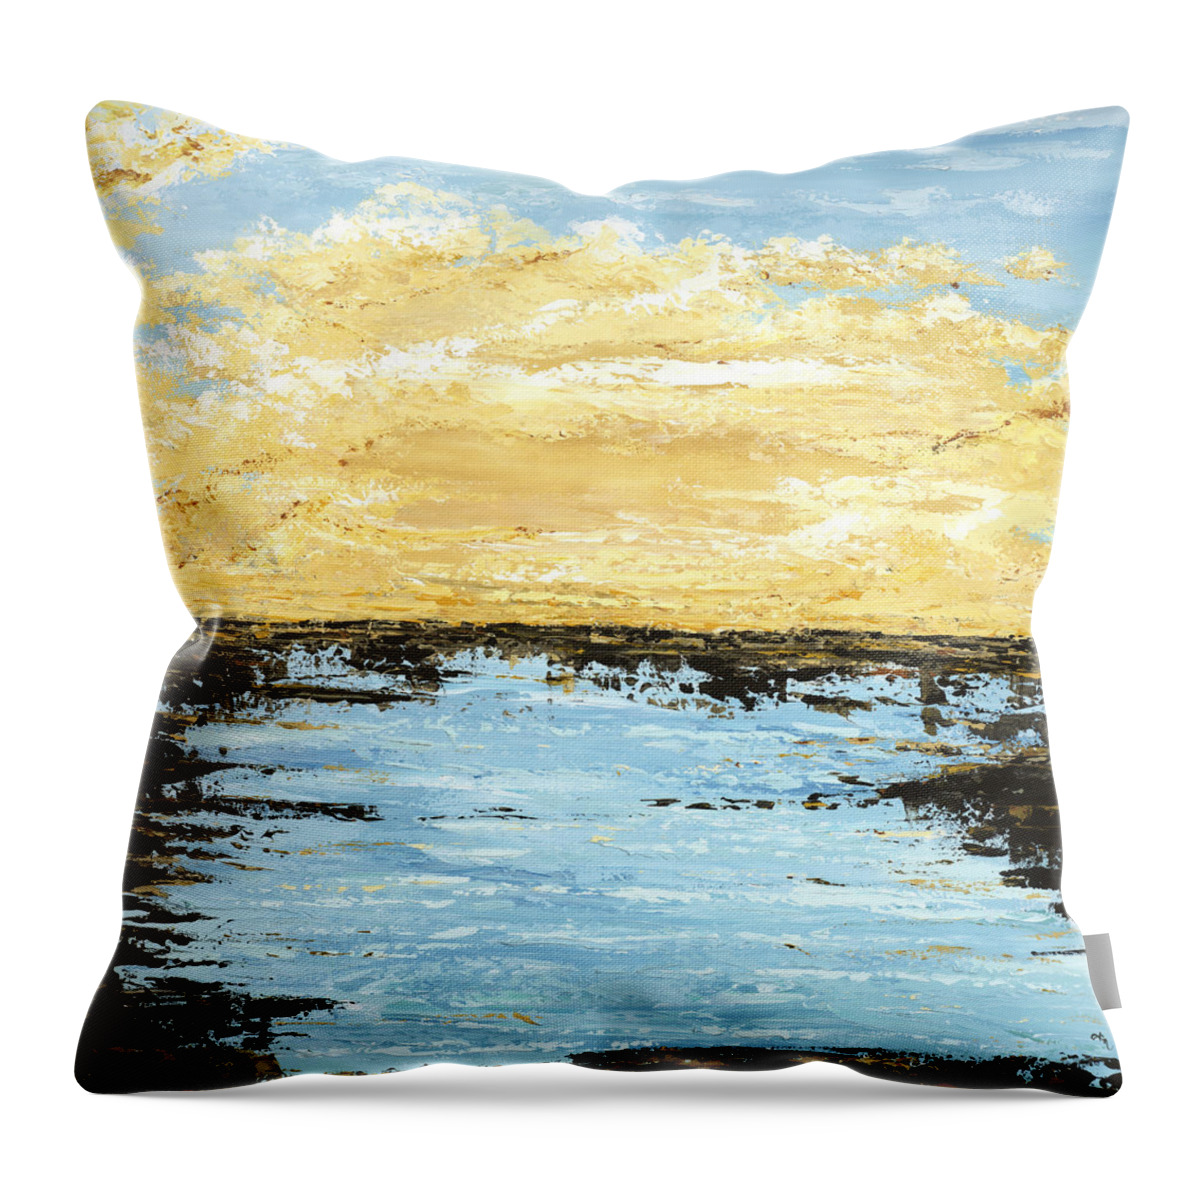 Ocean Throw Pillow featuring the painting Sunset Plunge by Tamara Nelson